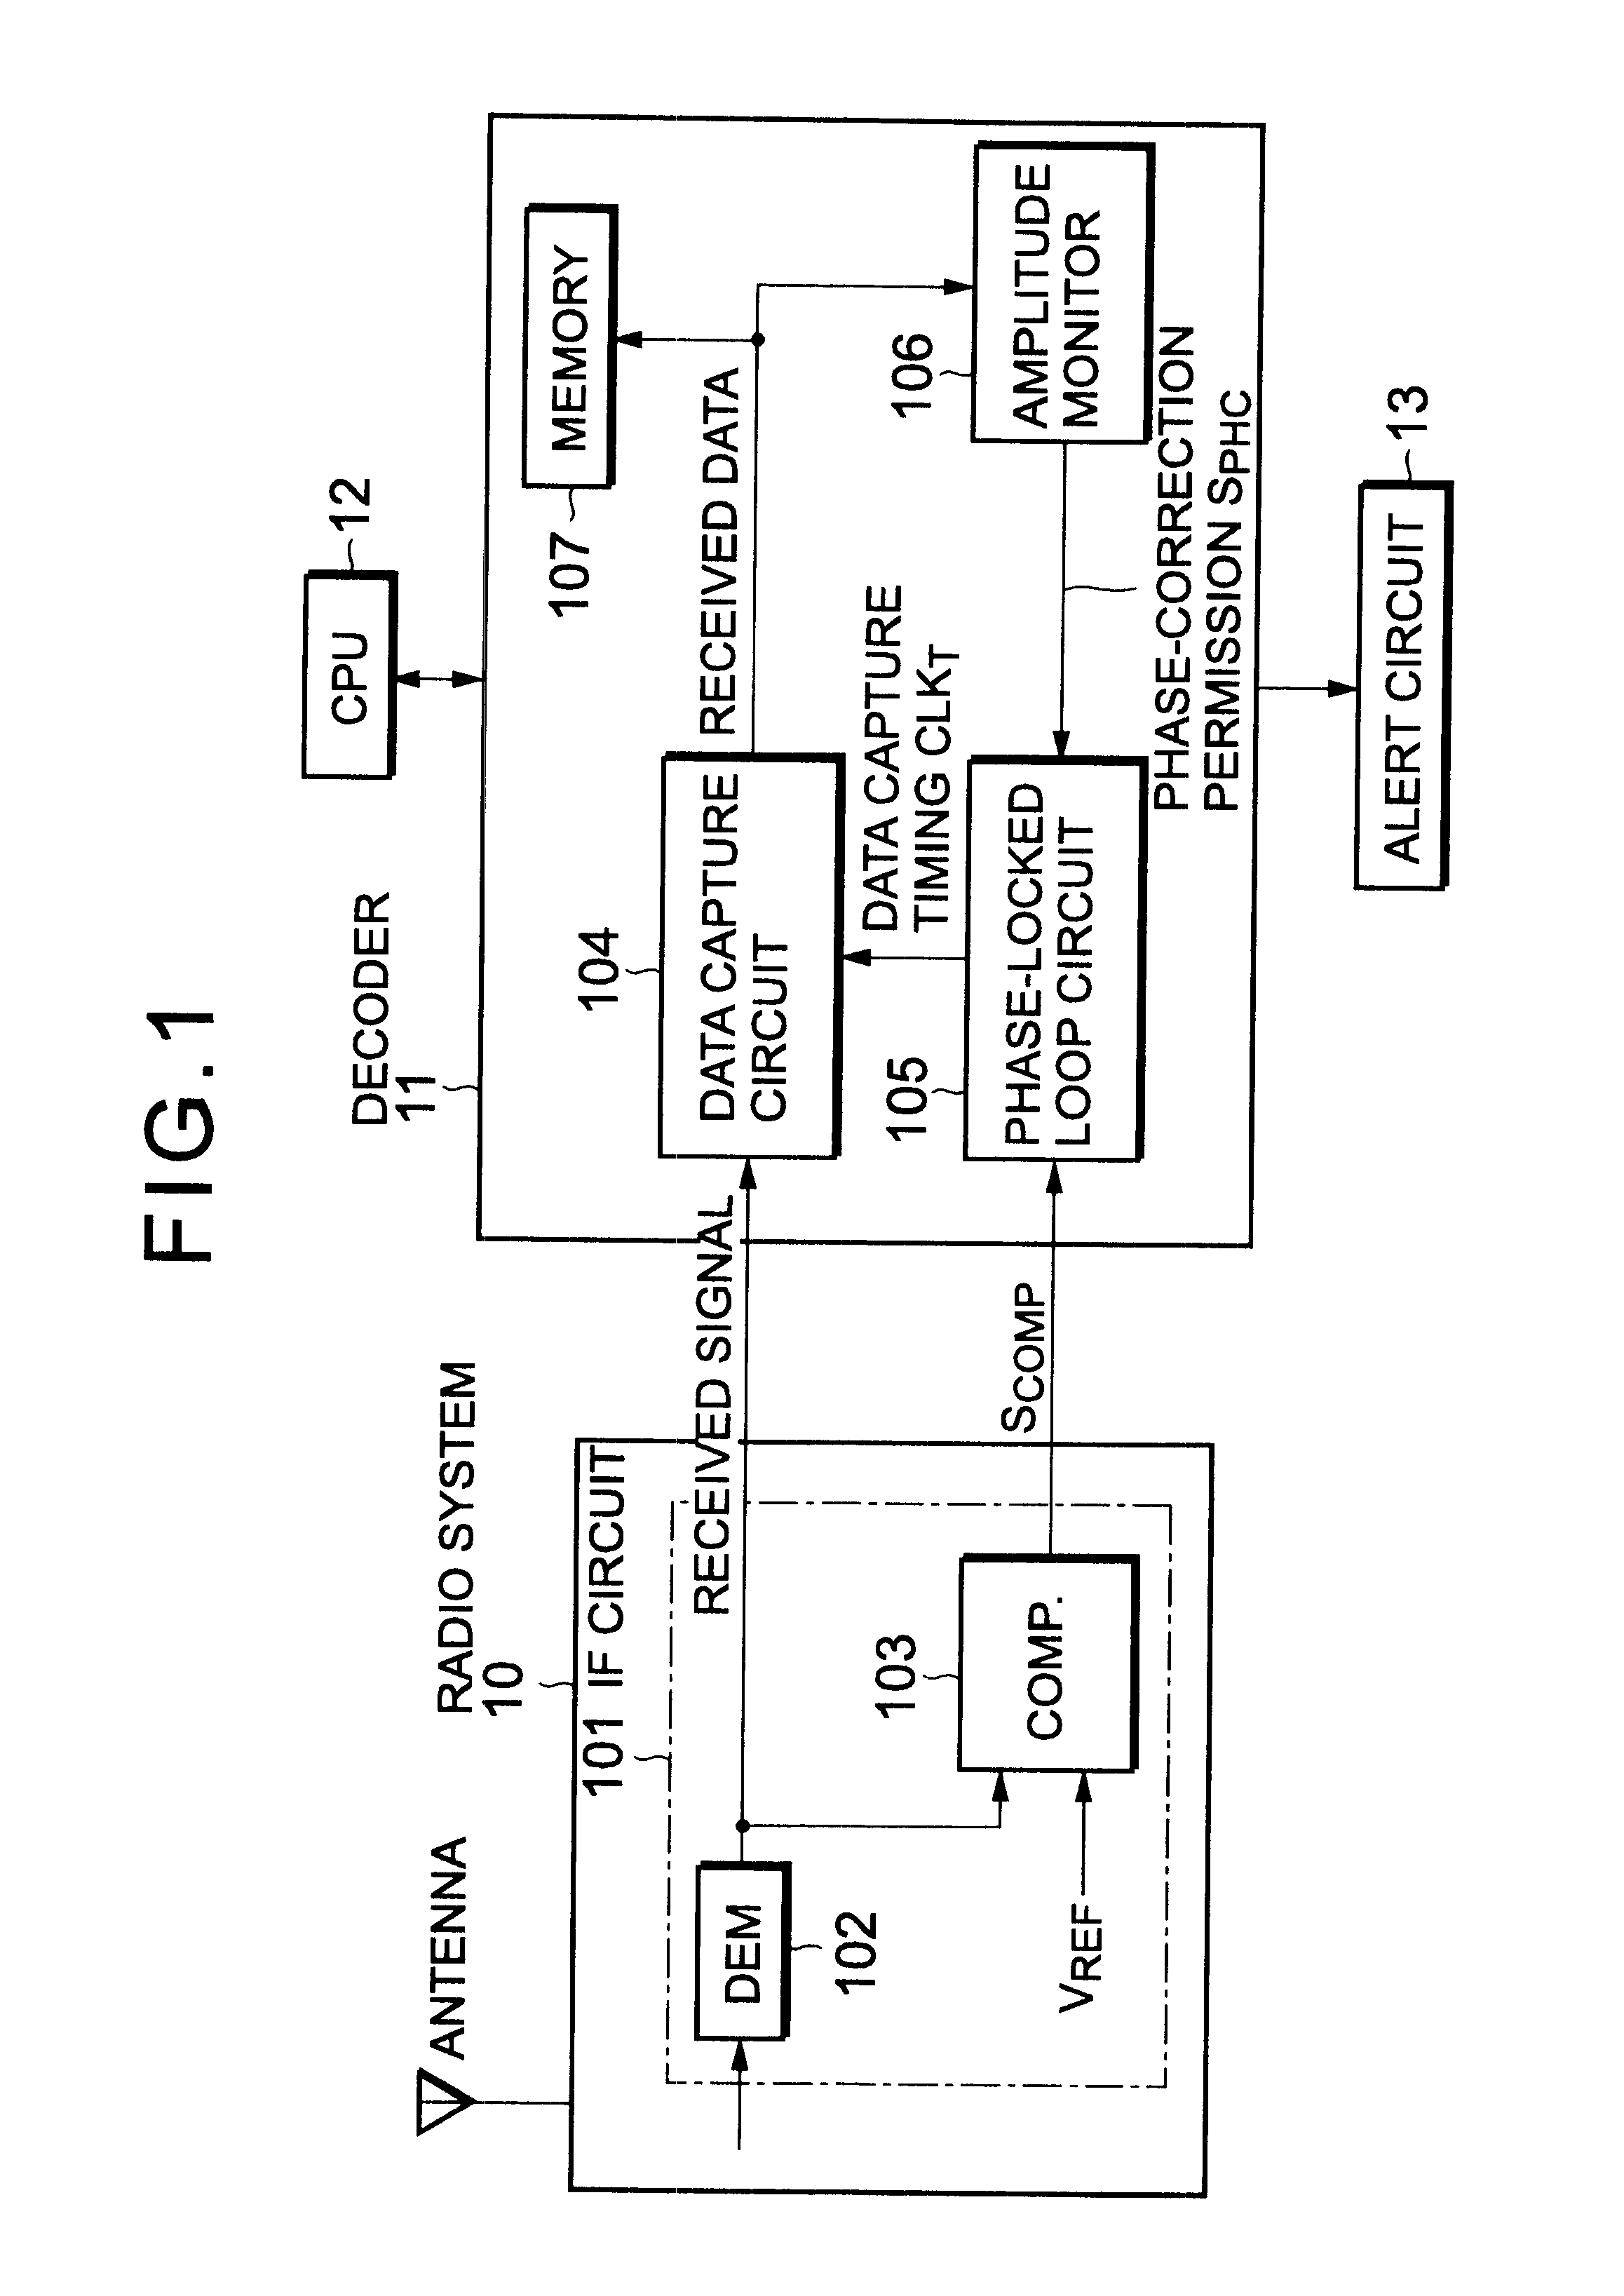 Amplitude change time activated phase locked controller in a selective call receiver